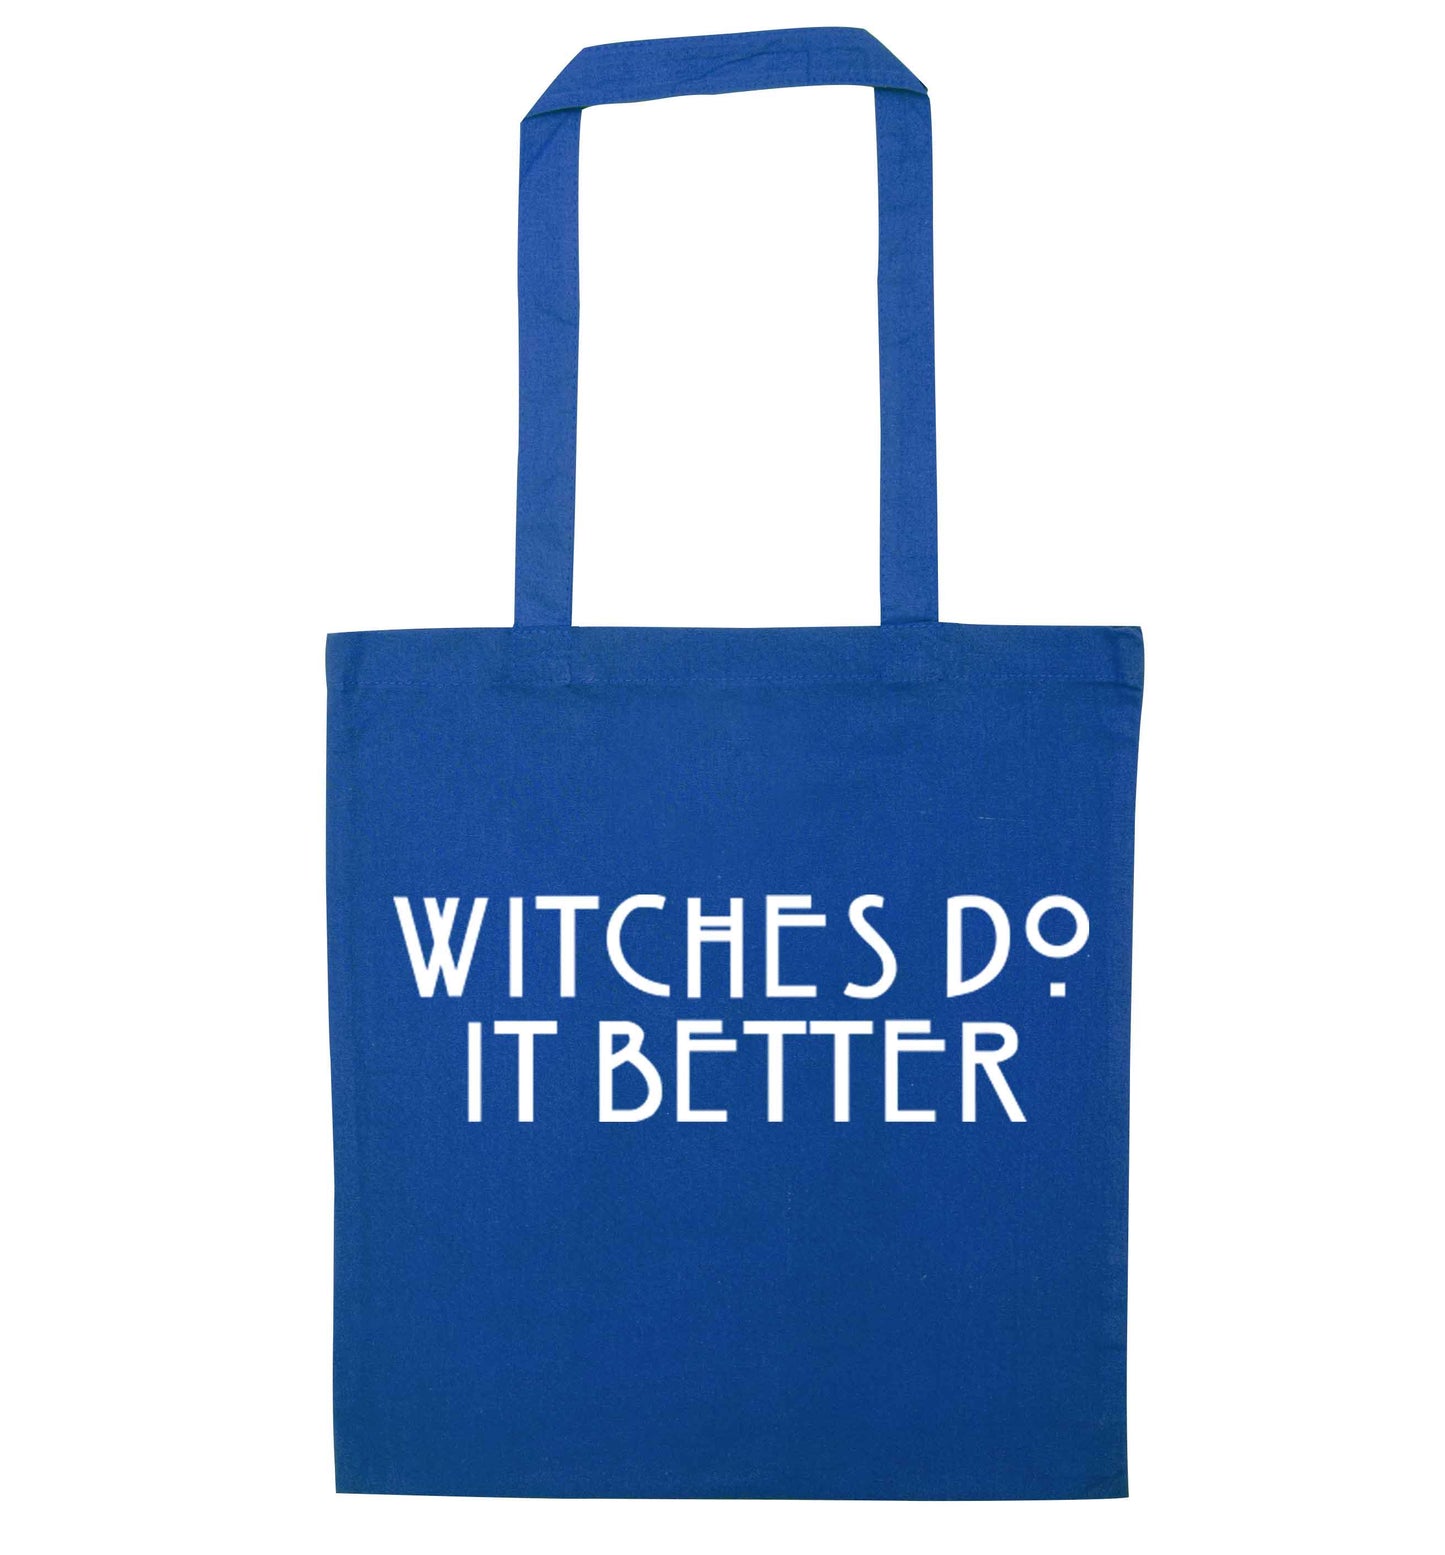 Witches do it better blue tote bag